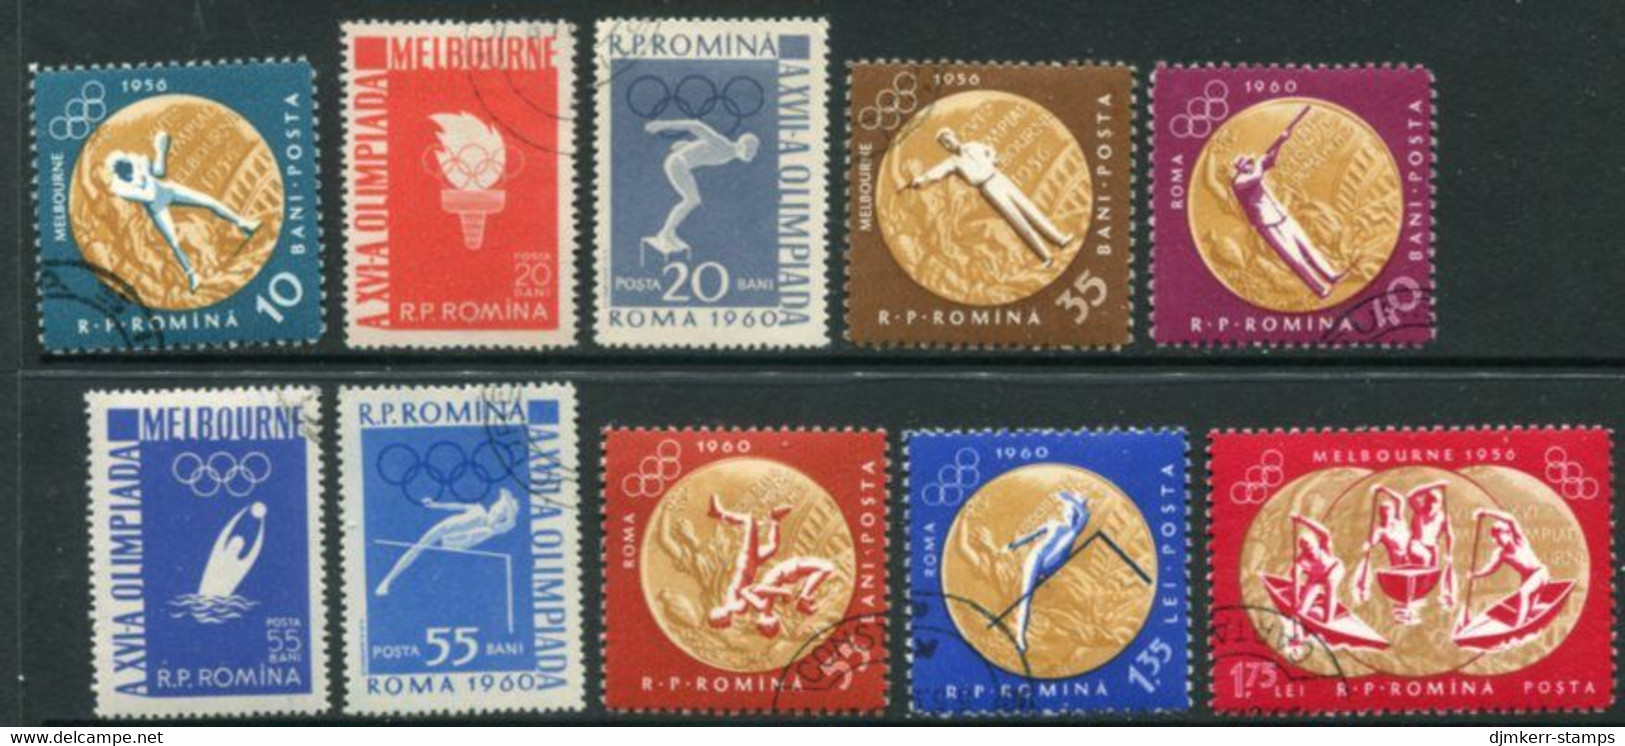 ROMANIA 1961 Melbourne Olympic Games  Perforated Used.  Michel 2010A-19A - Used Stamps